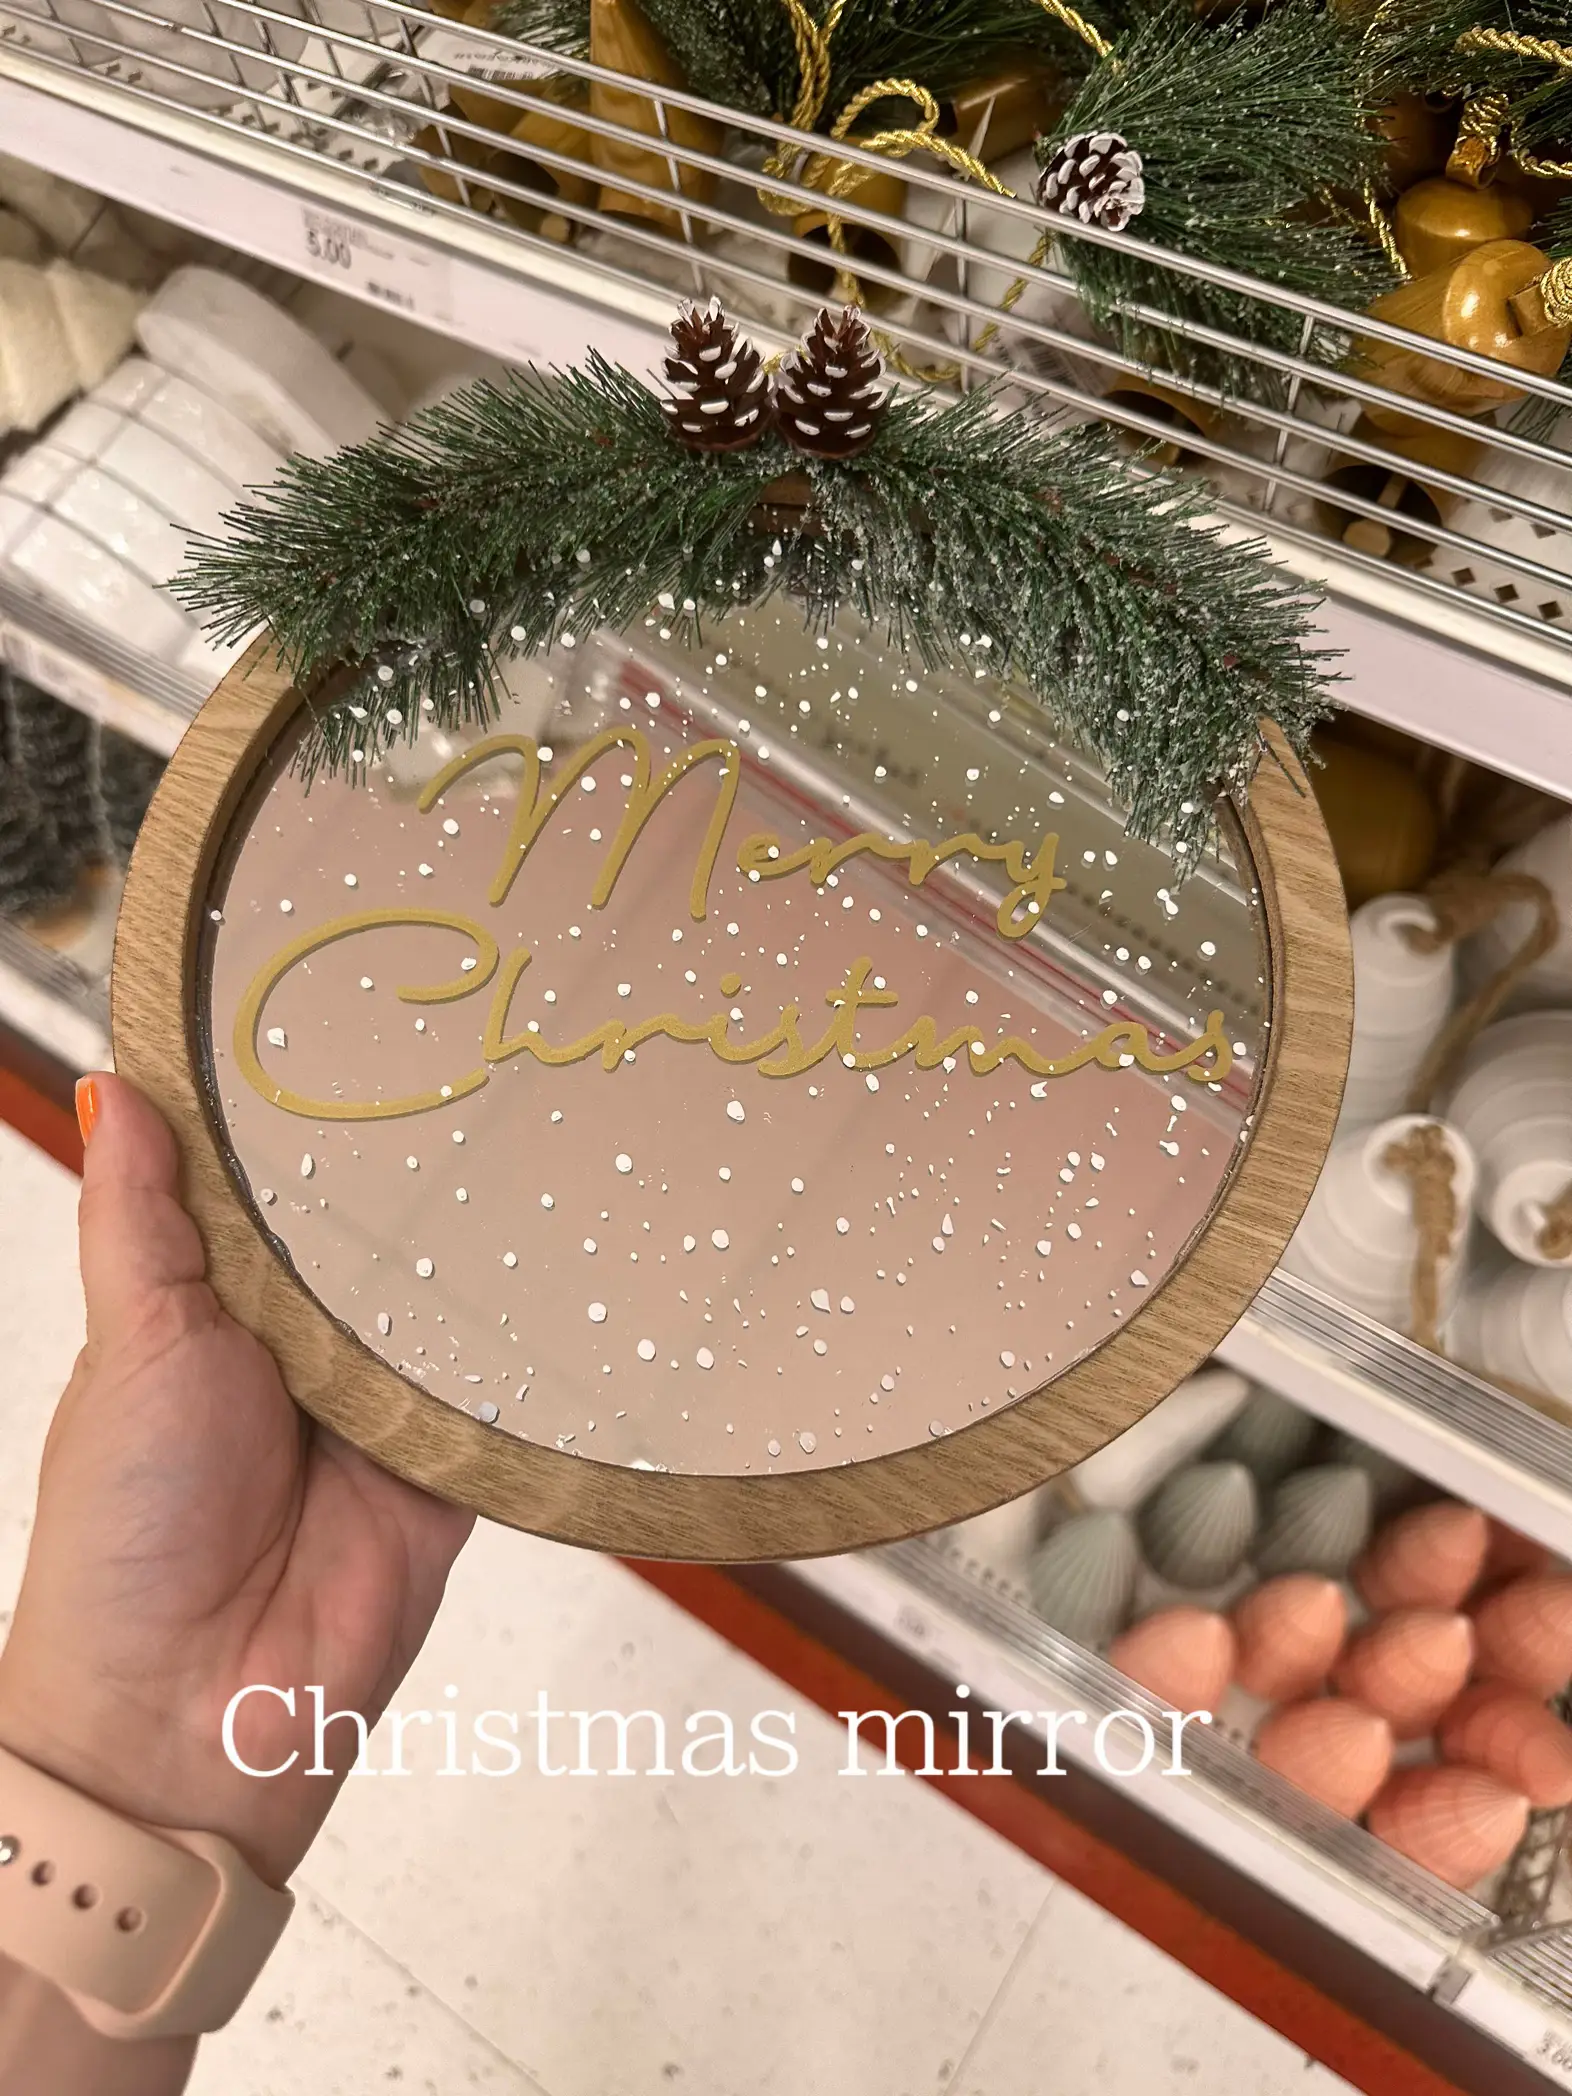  A Christmas mirror with a sign that says "Mirror".